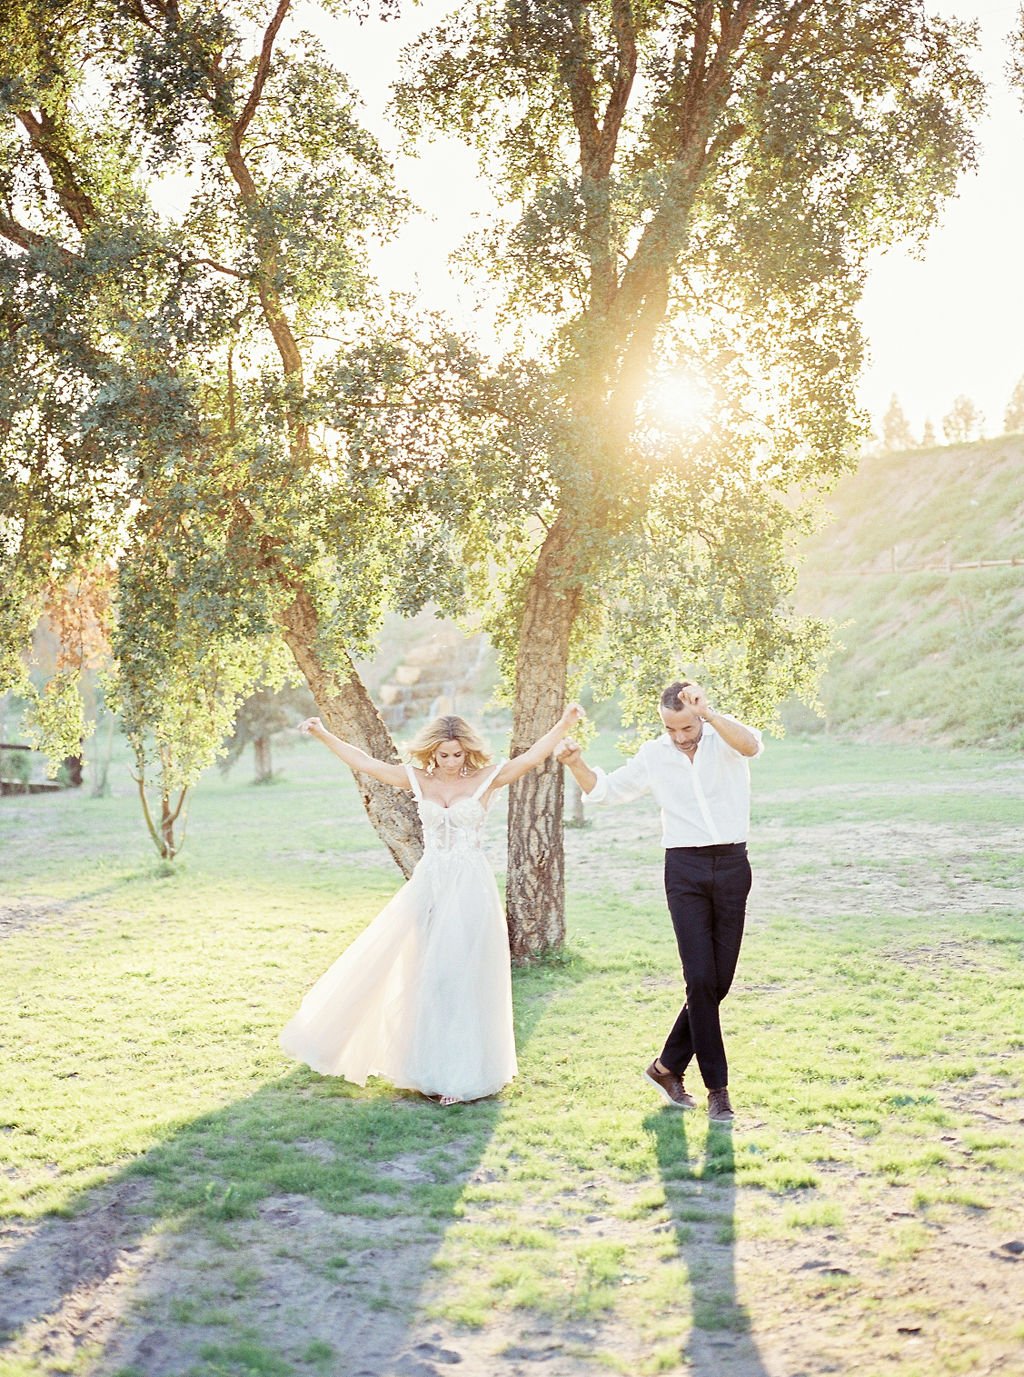 Bride and groom dancing in a garden, with a tree and the setting sun behind them